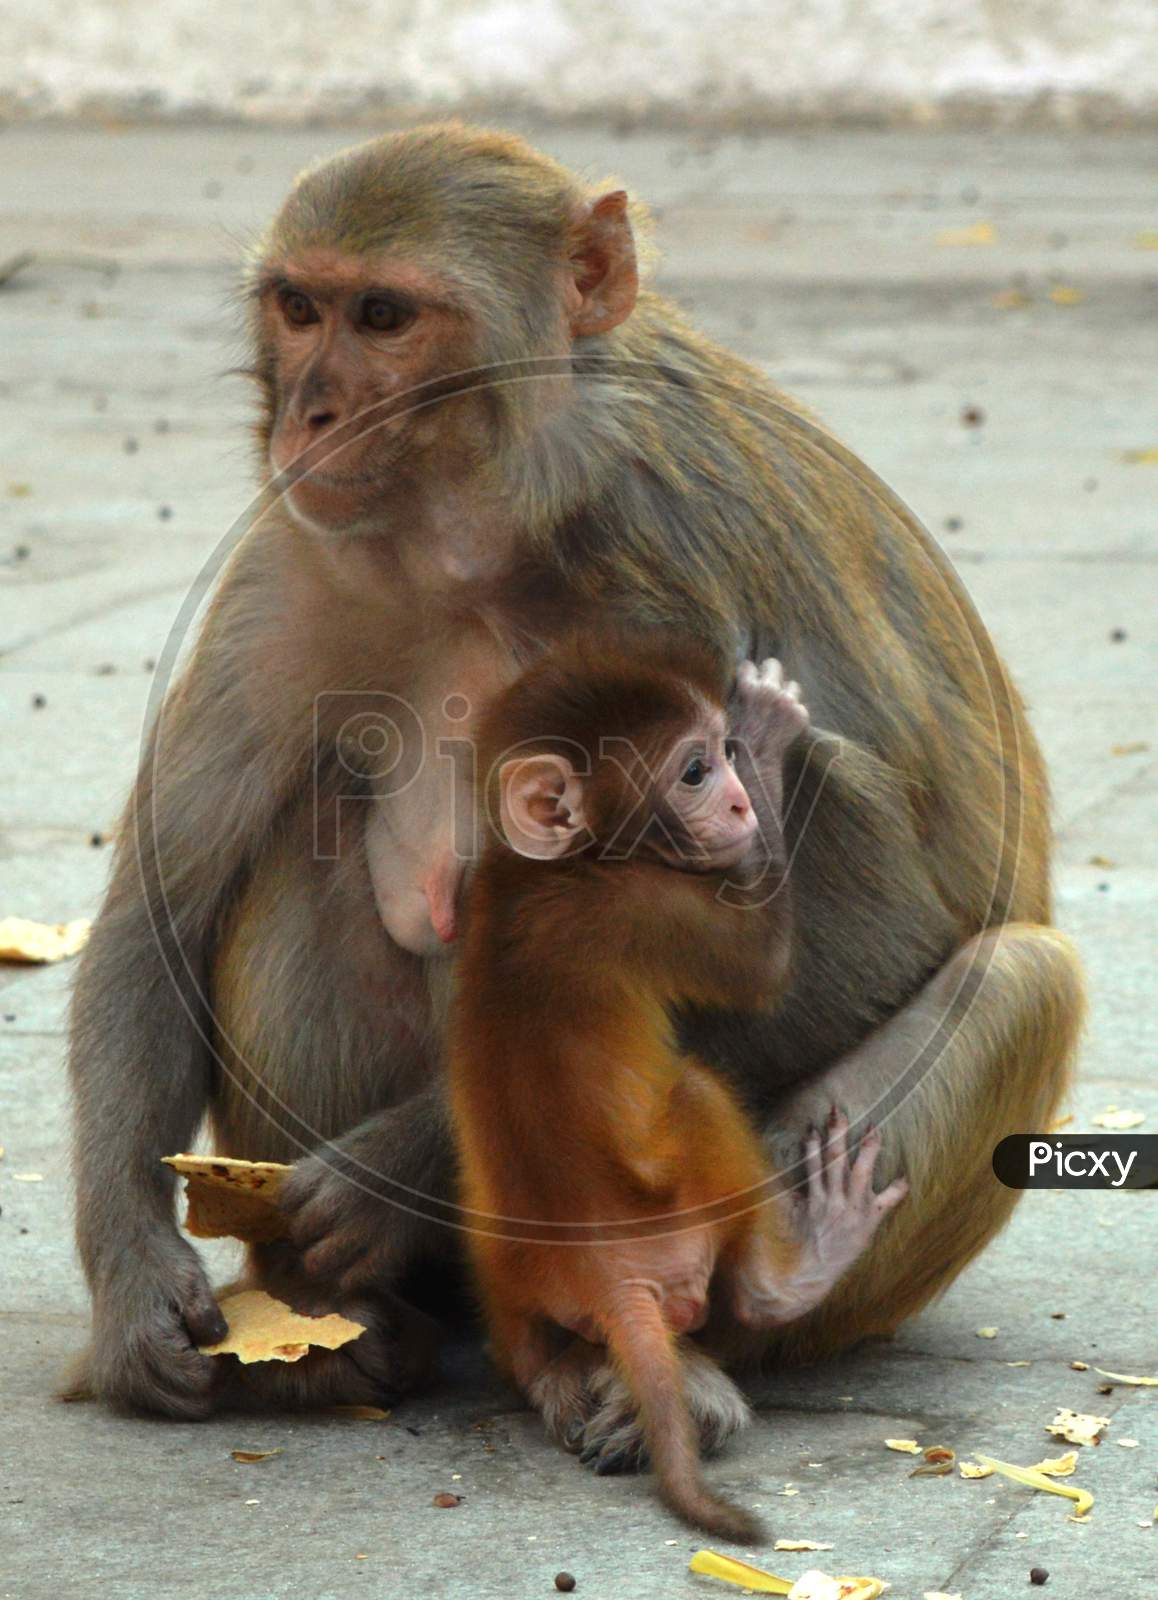 Mother and baby monkey